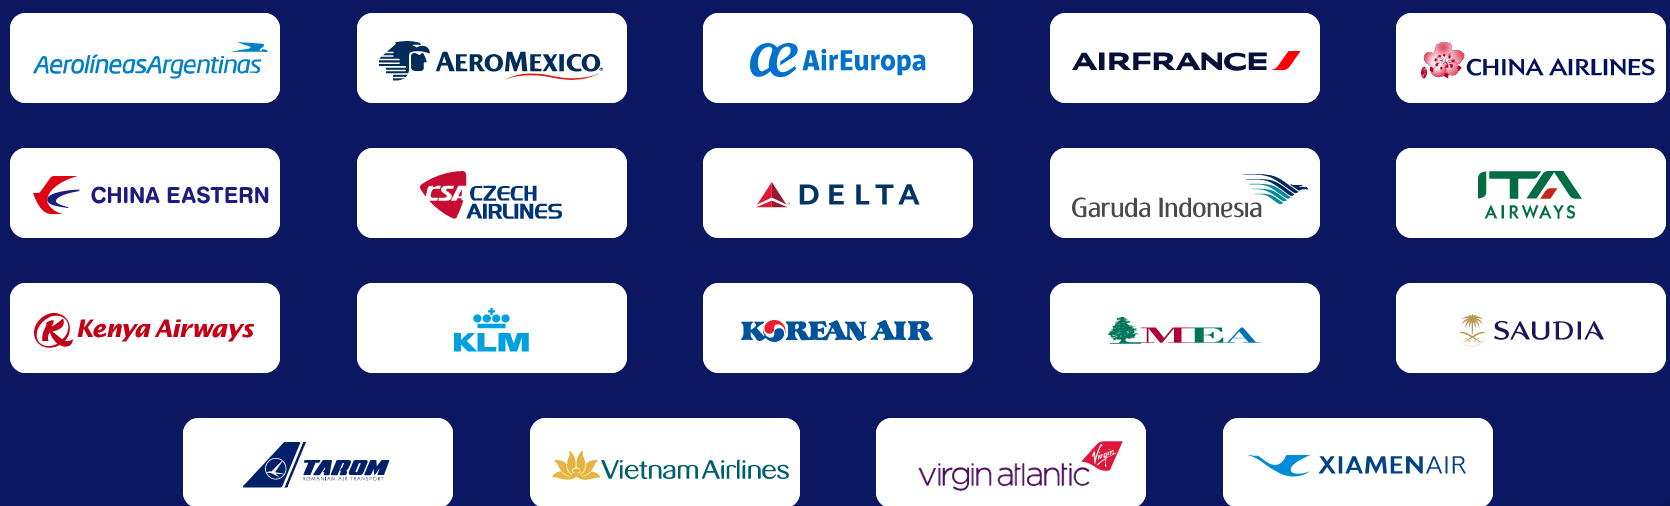 what airlines are members of skyteam